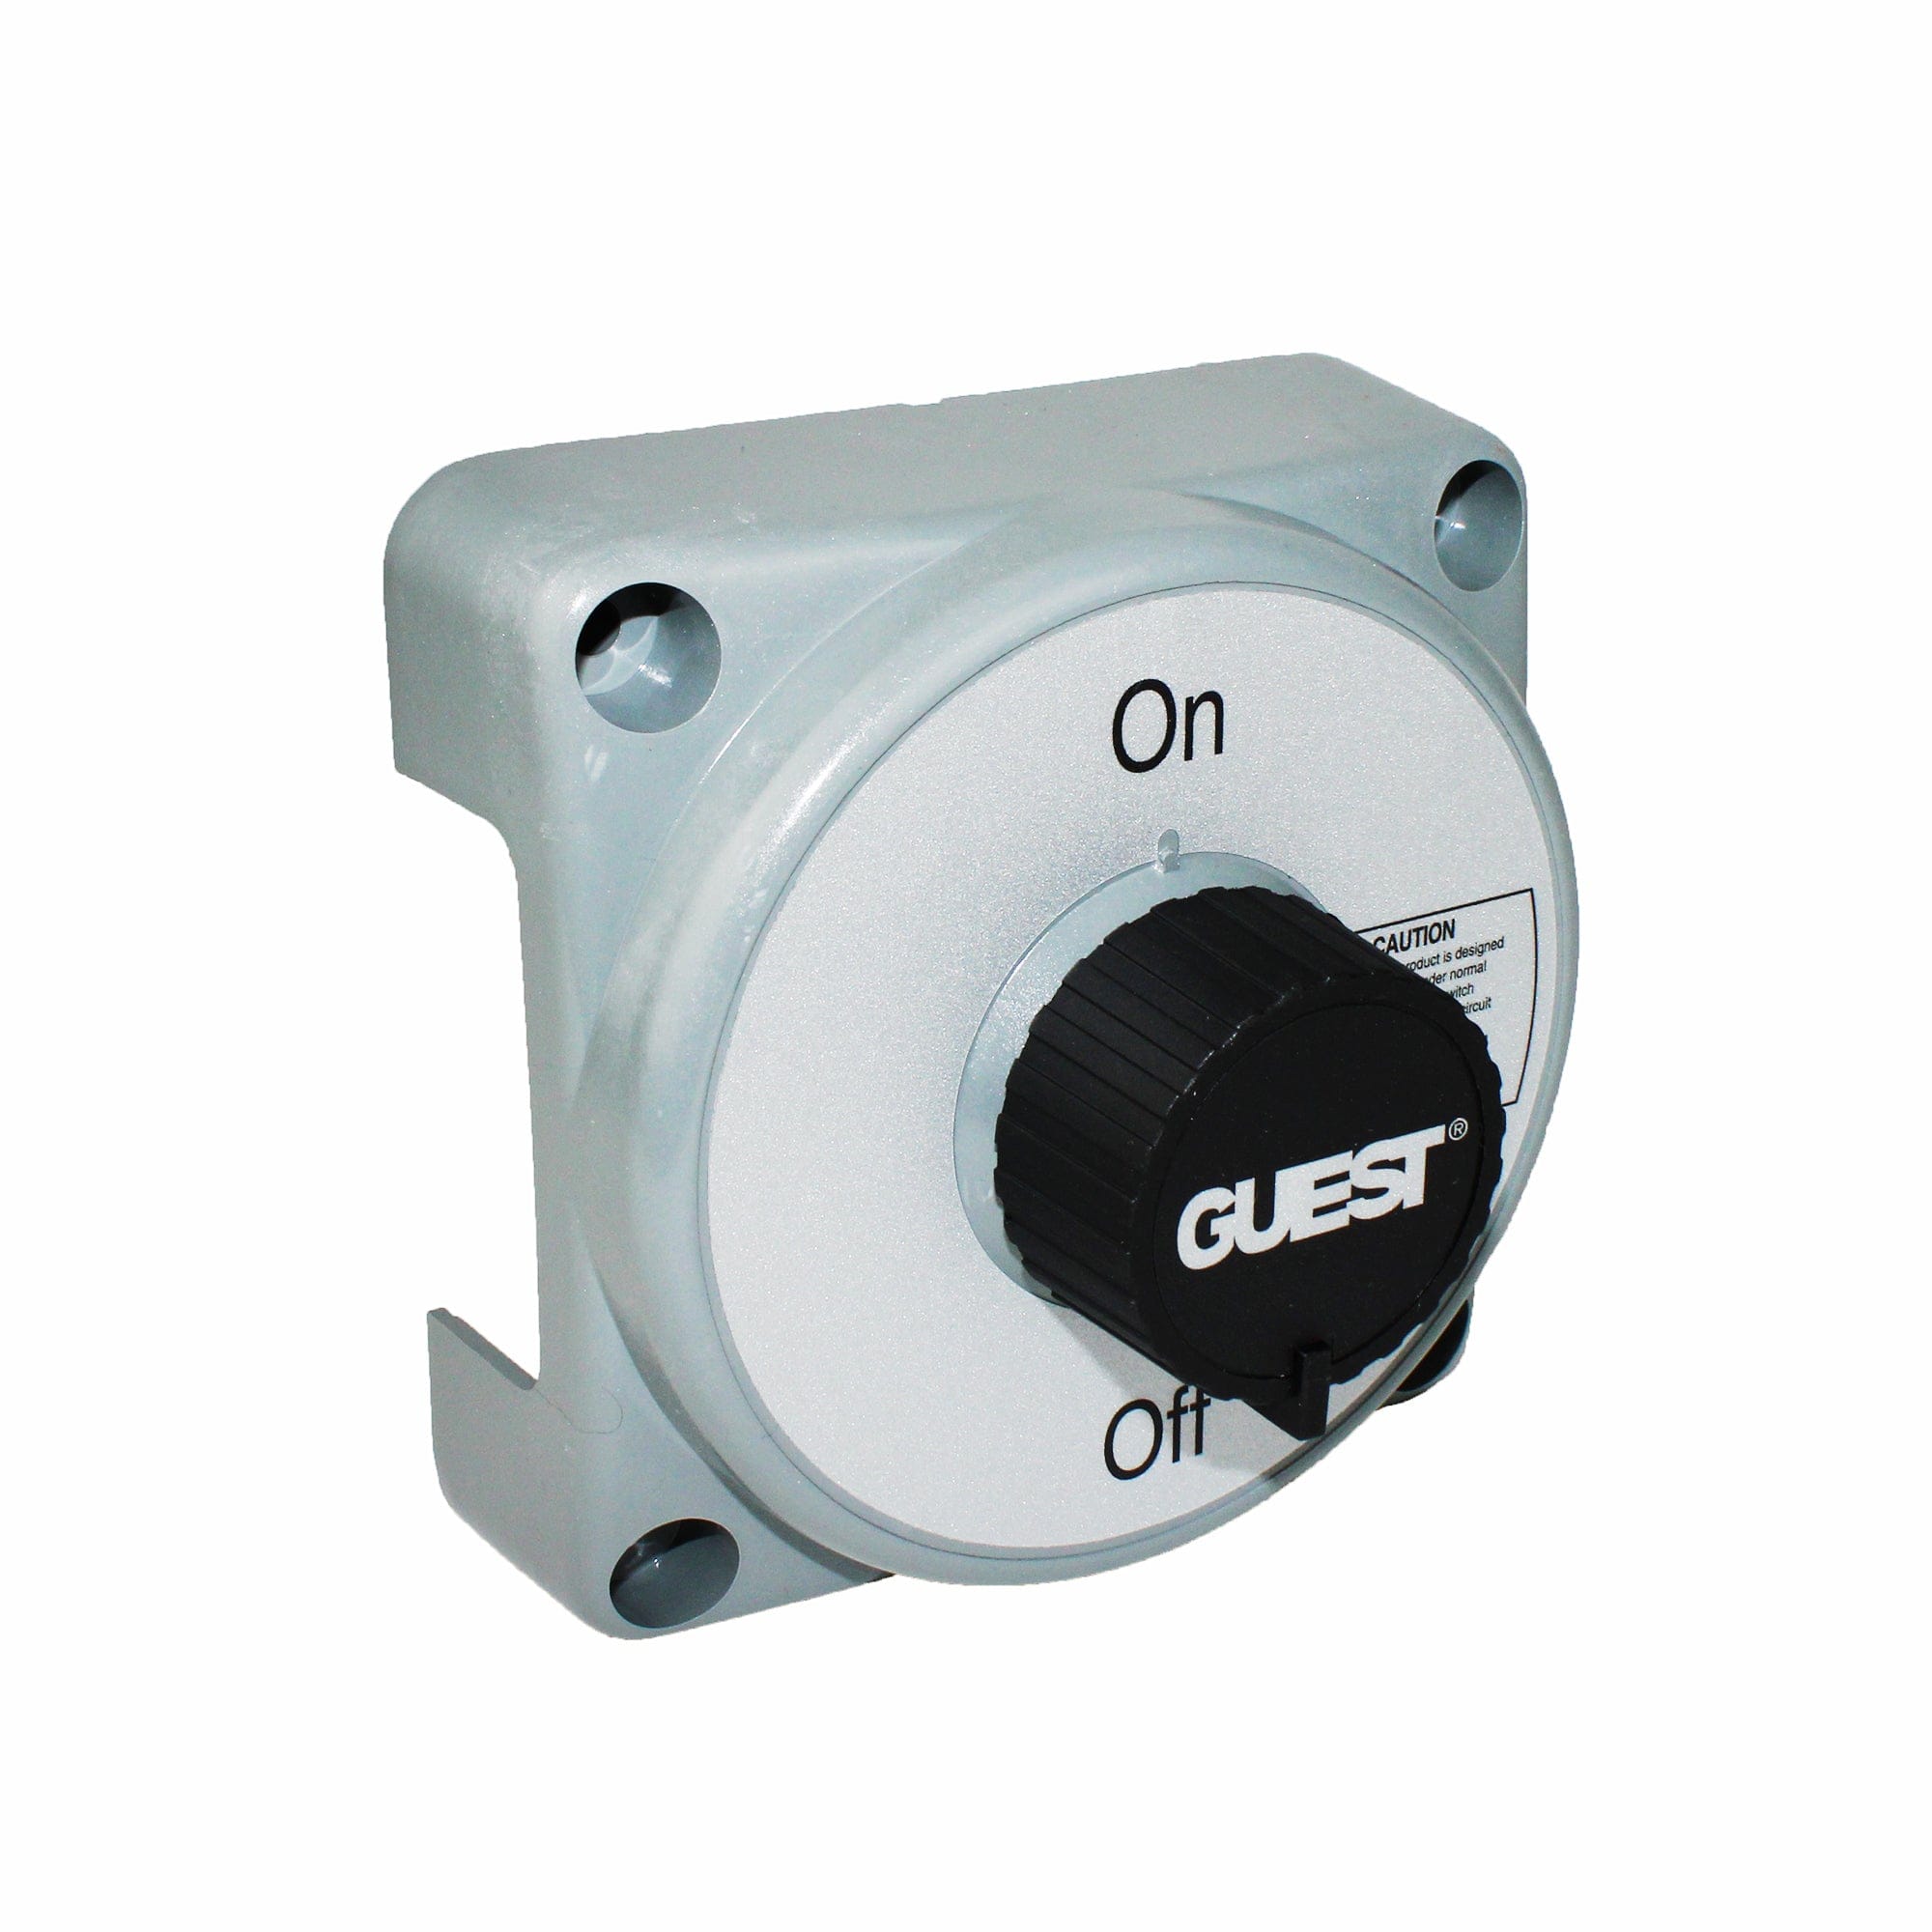 Guest 2304A Extra-Duty Diesel On/Off Battery Switch